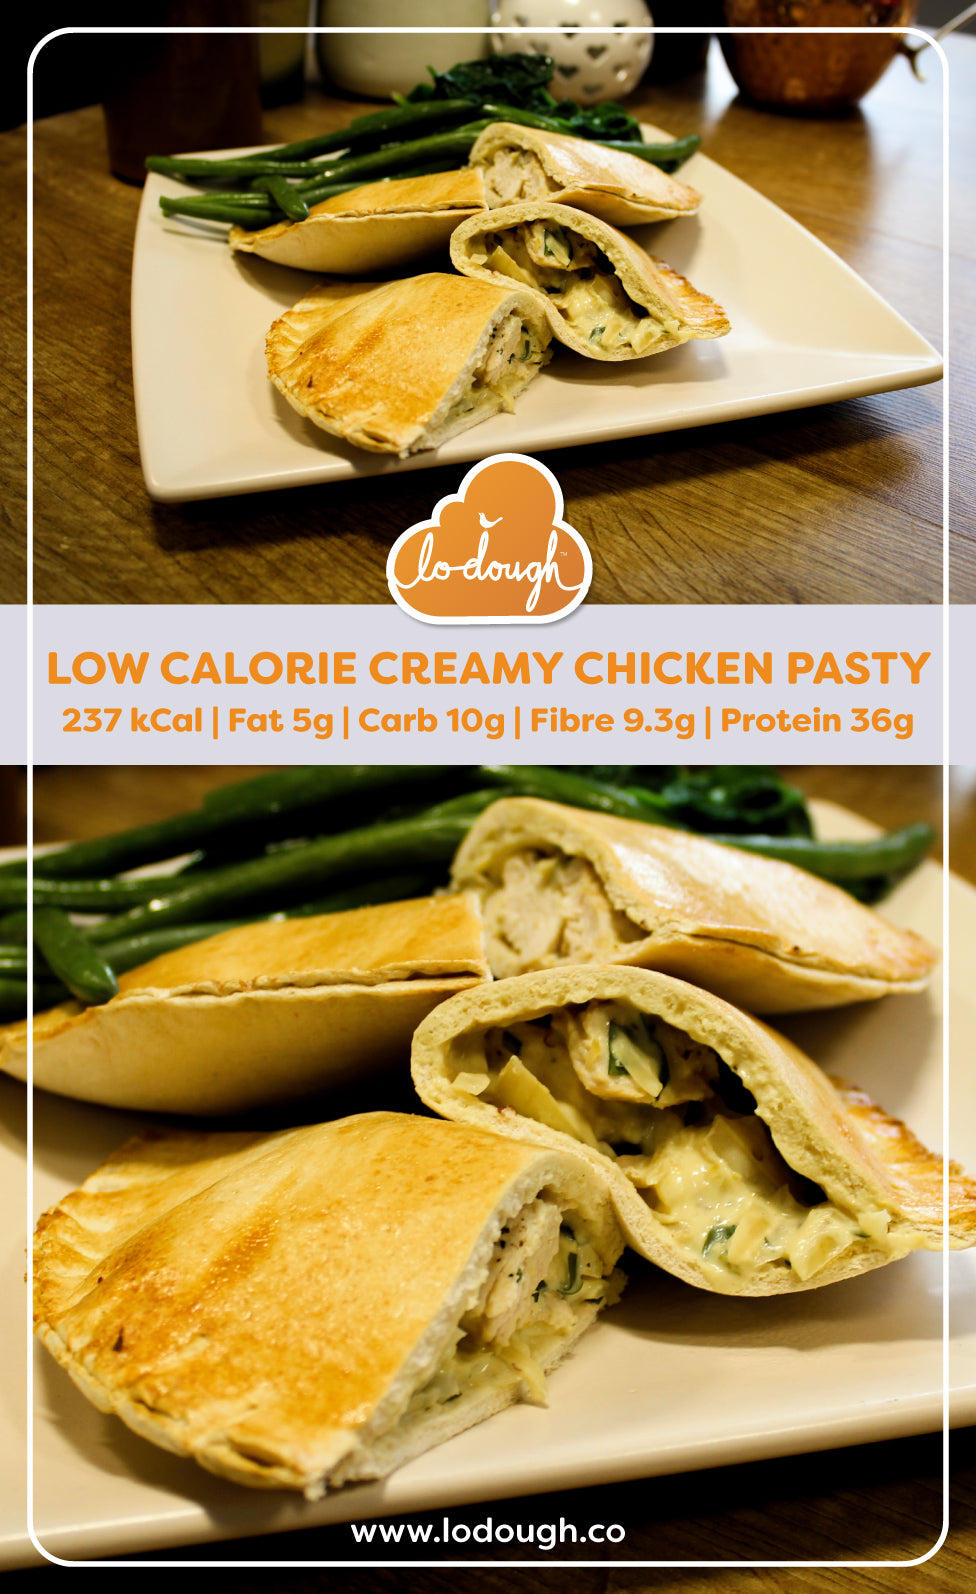 Low Calorie Creamy Chicken Pasty